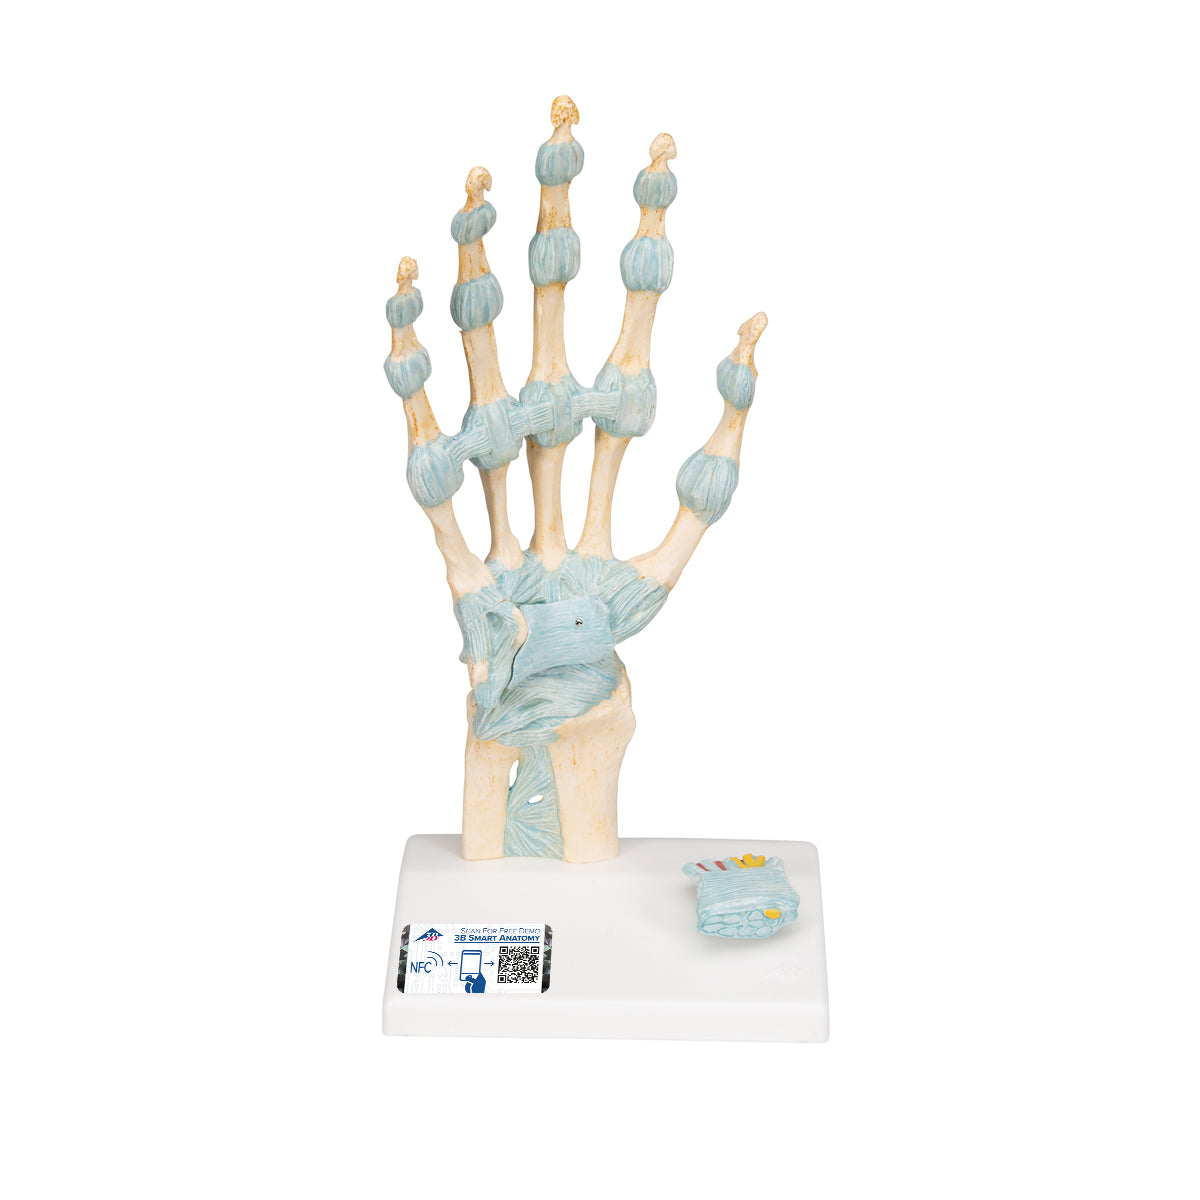 Hand model with ligaments and carpal tunnel contents